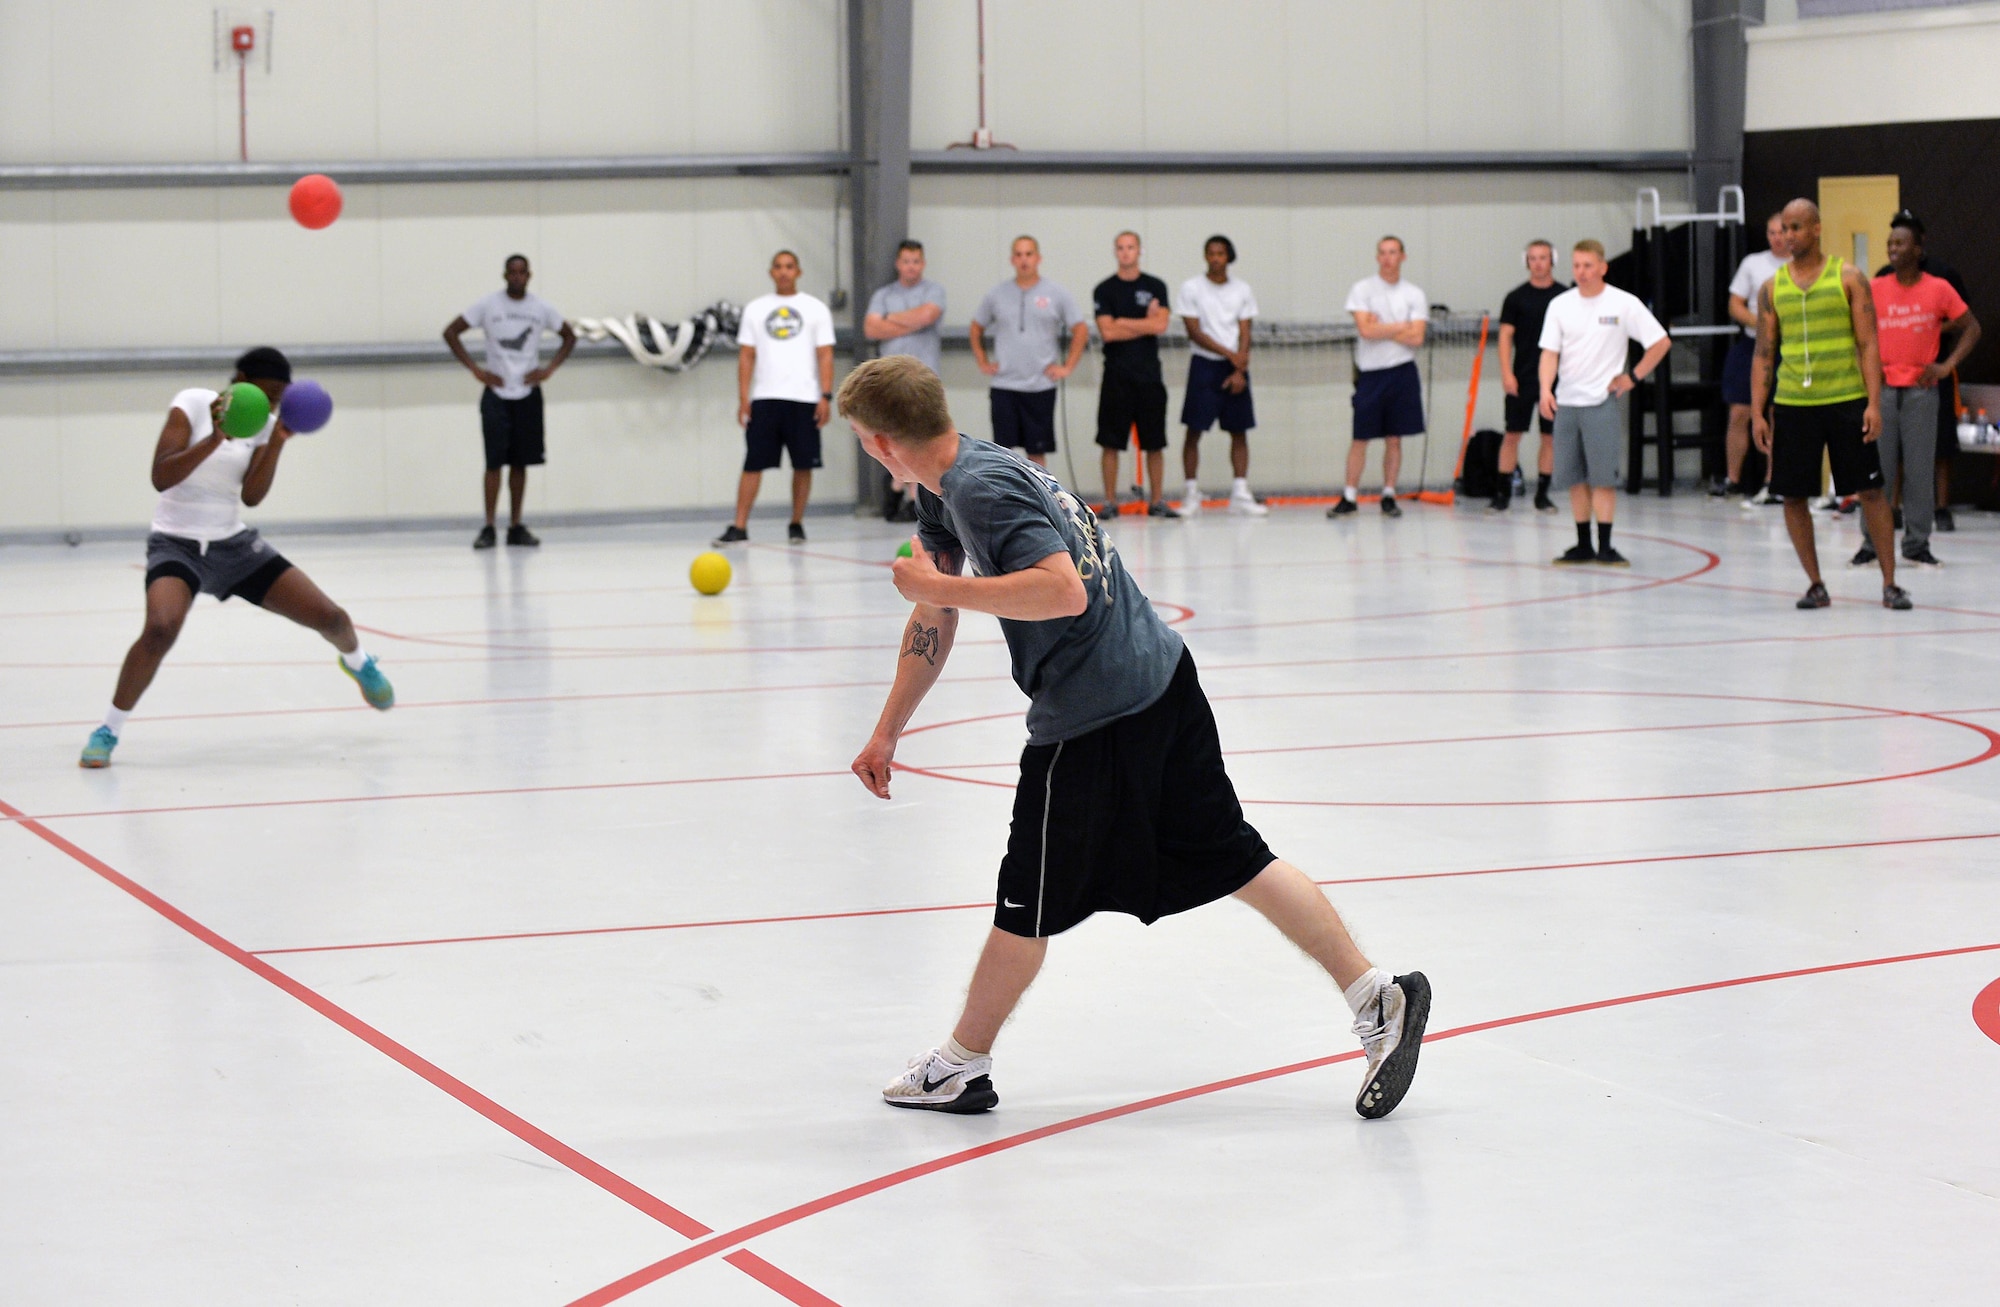 Dodgeball players go head-to-head during a tournament at an undisclosed location in Southwest Asia June 13, 2015. The teams, who were made up of U.S. Soldiers and Airmen as well as other coalition forces, participated in five sports, including this one, to help celebrate the U.S. Army’s 240th birthday. (U.S. Air Force photo/Tech. Sgt. Jeff Andrejcik)